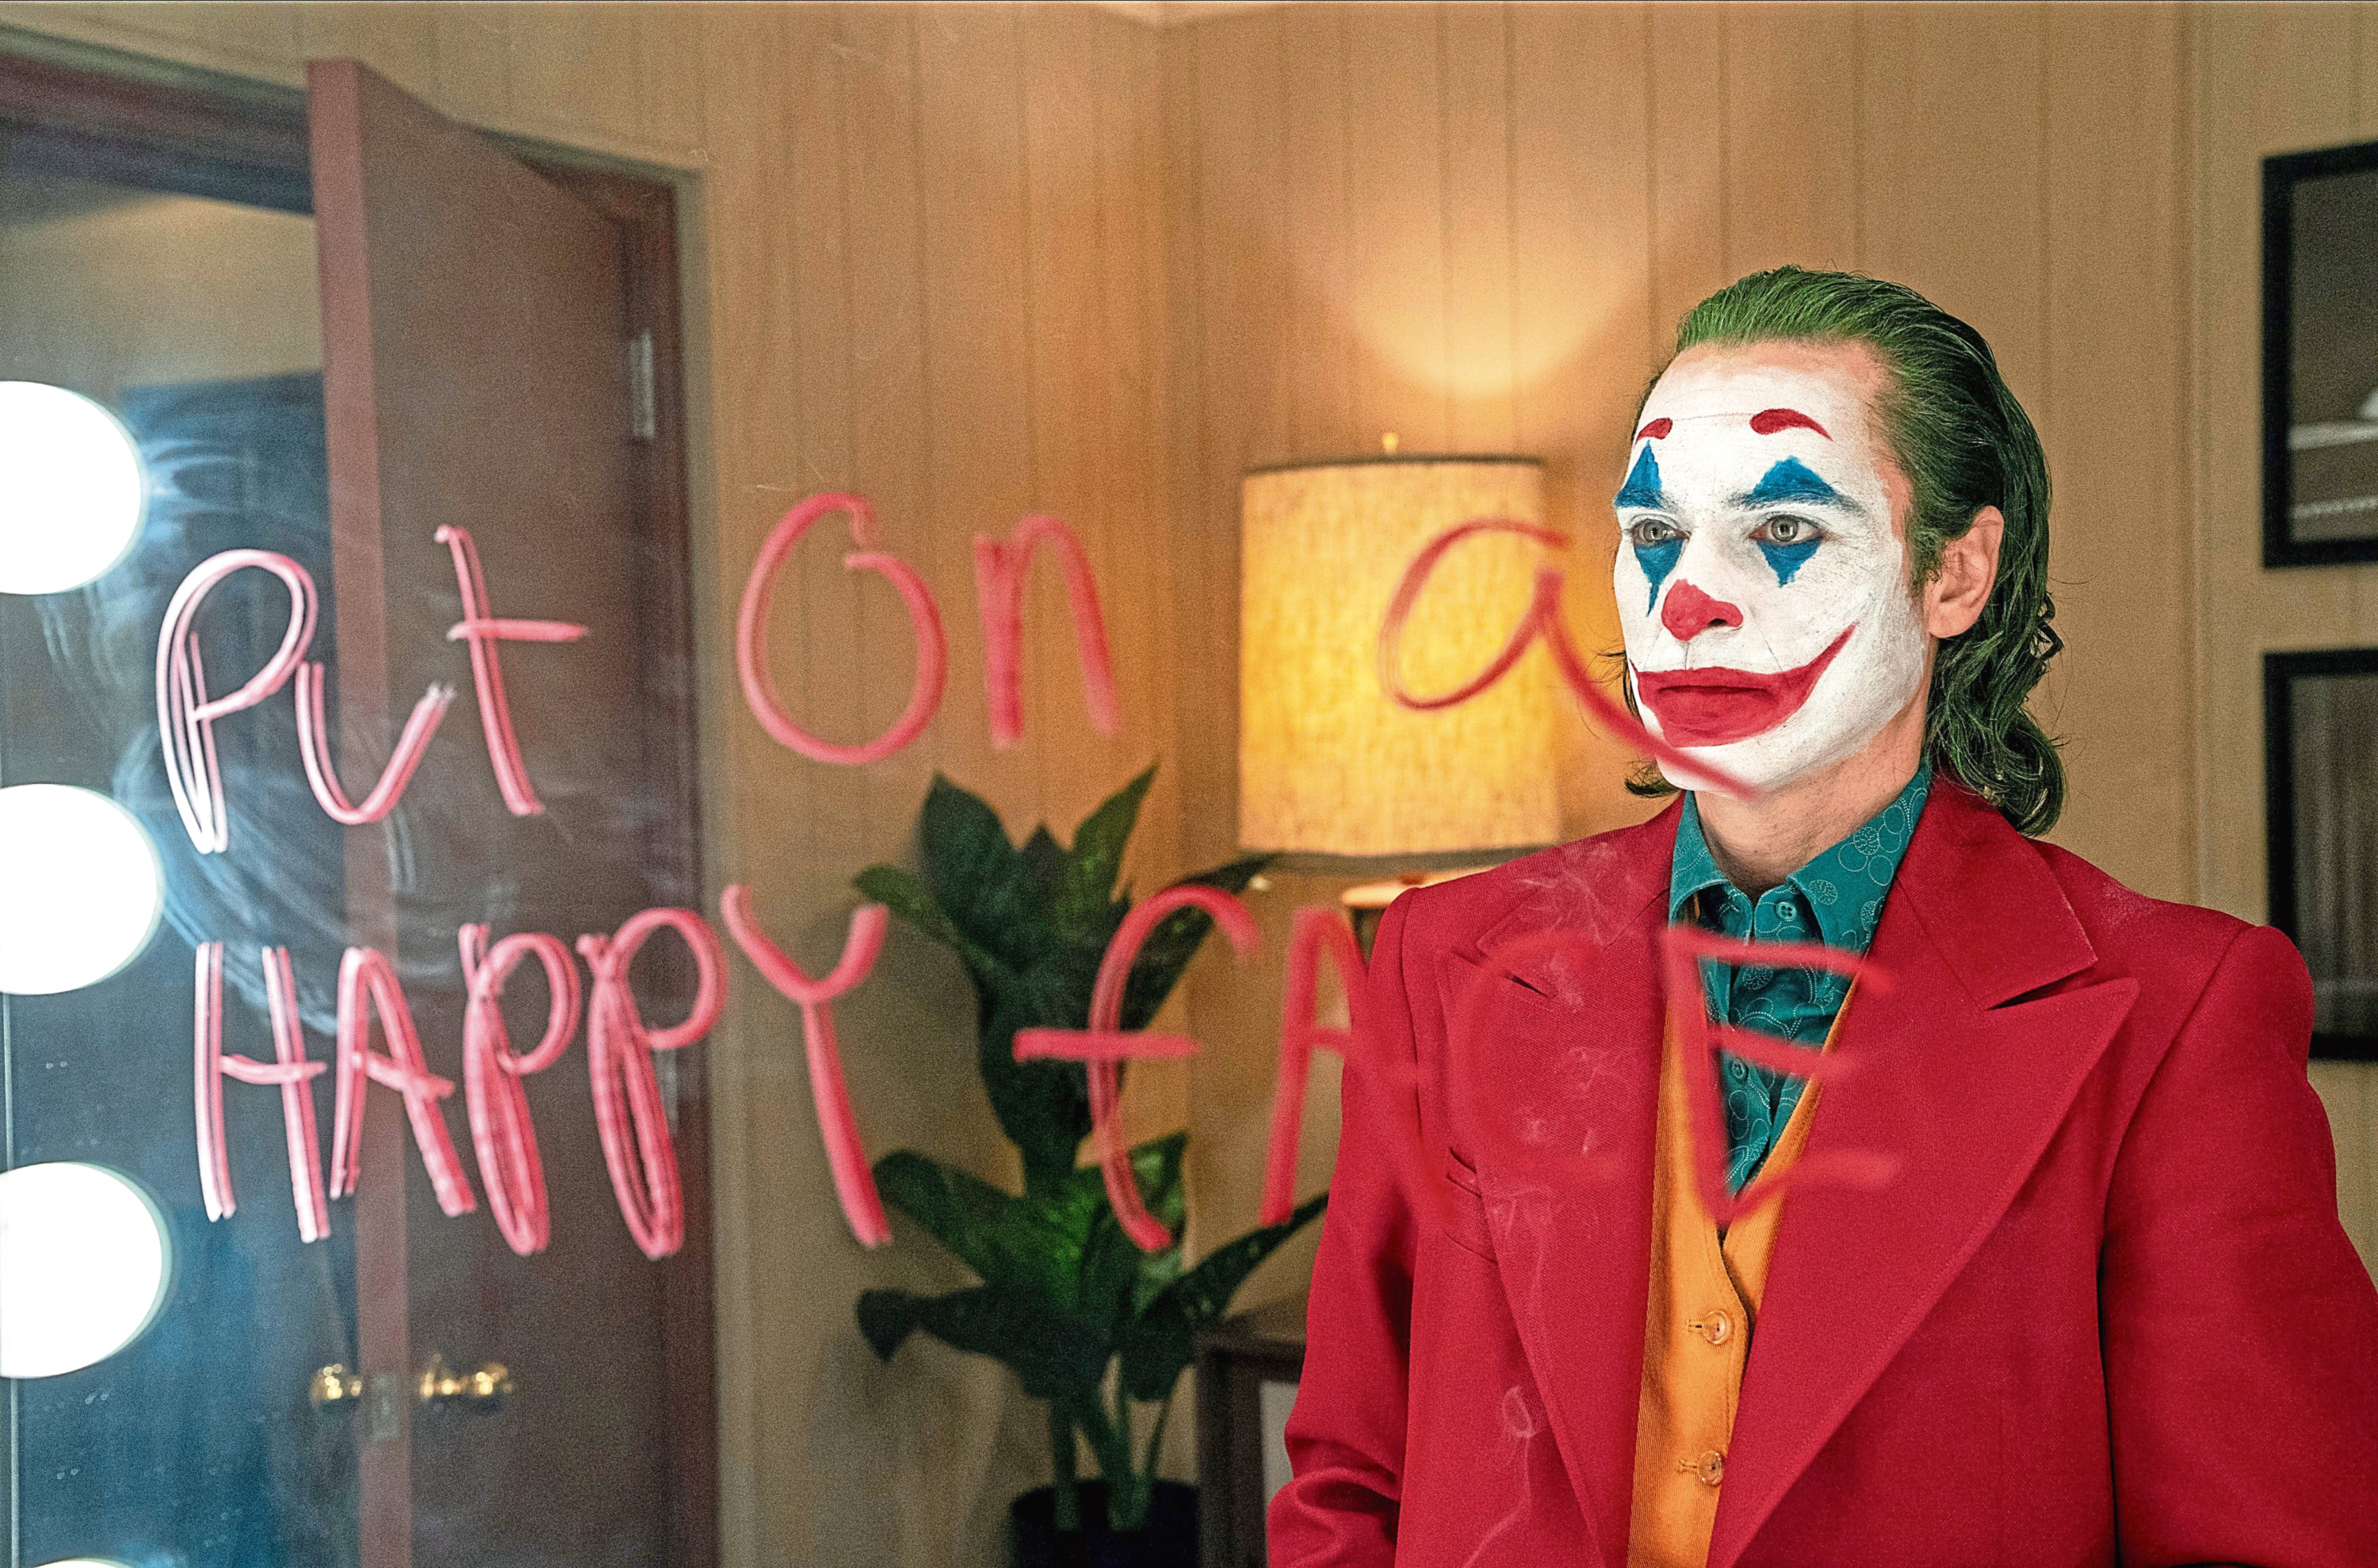 Joaquin Phoenix in Joker, the latest film to feature the character